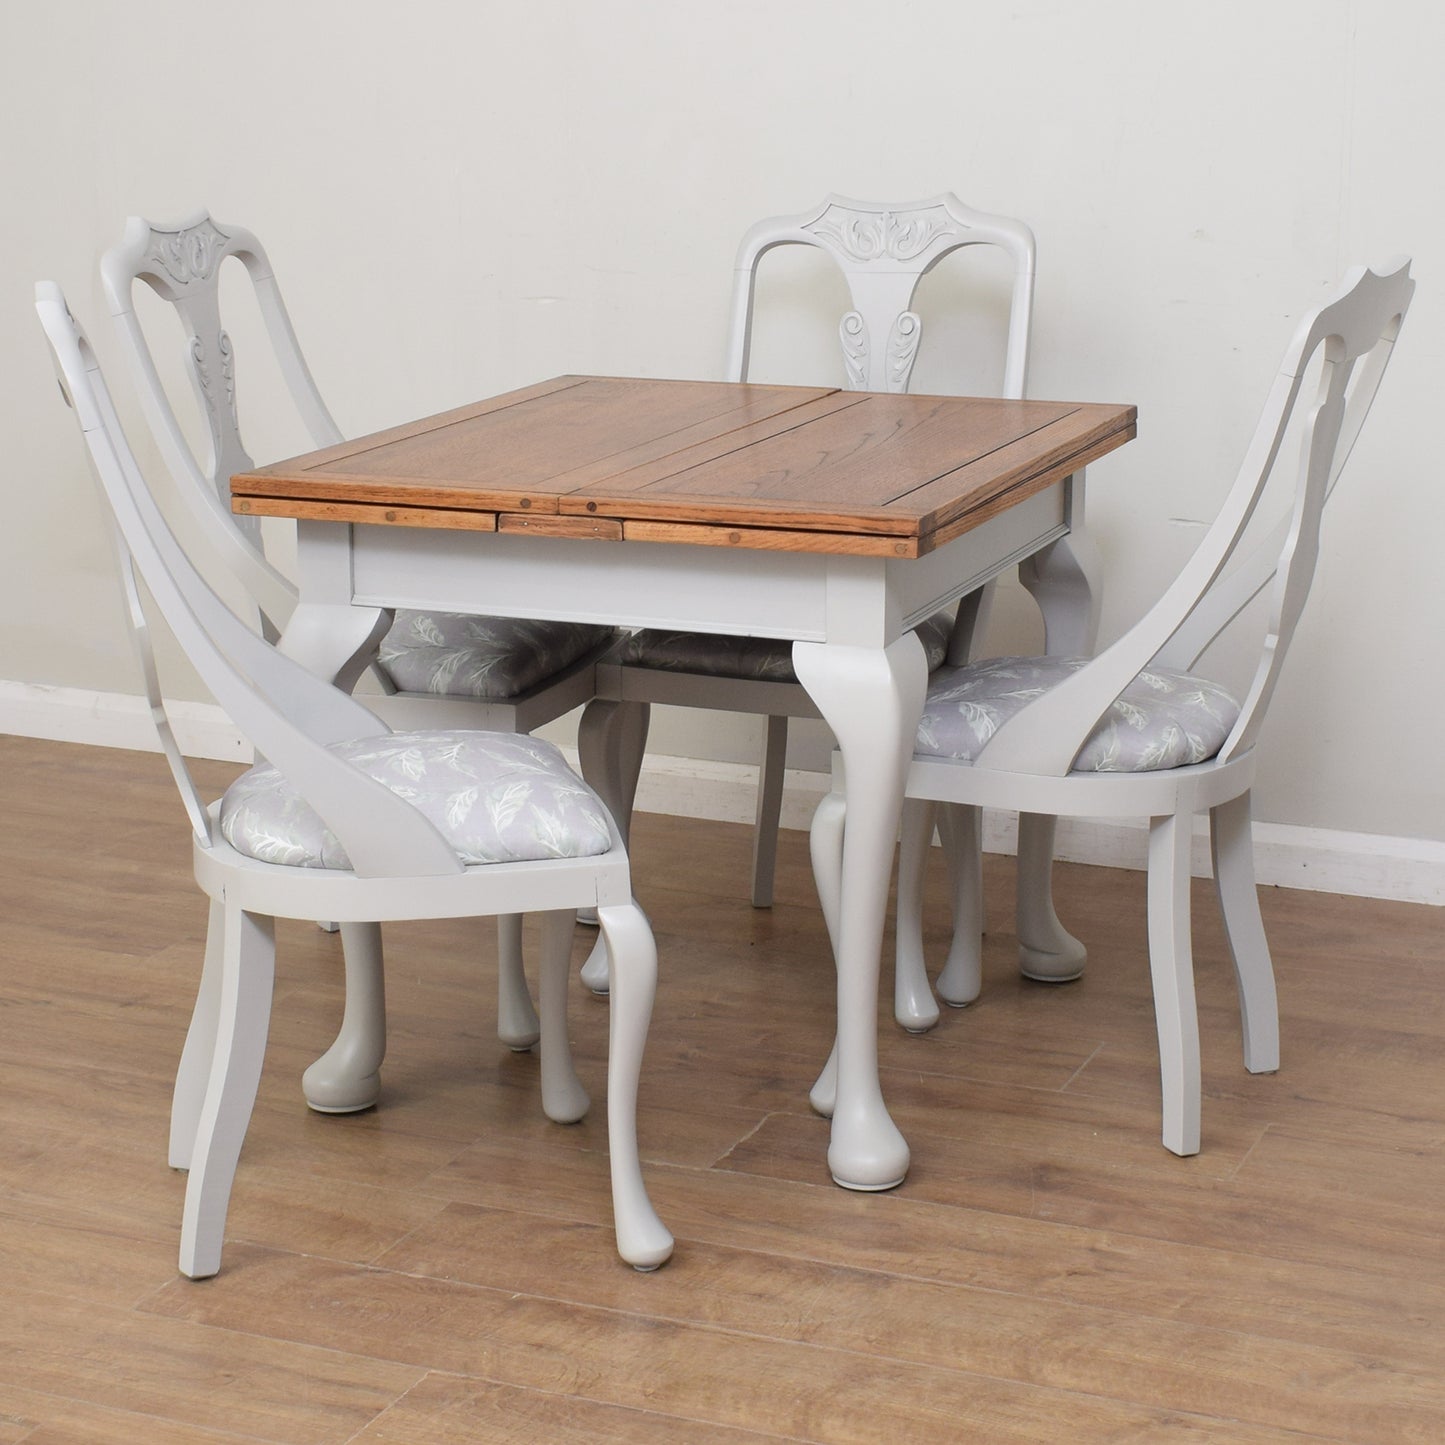 Vintage Draw-Leaf Table & Four Chairs